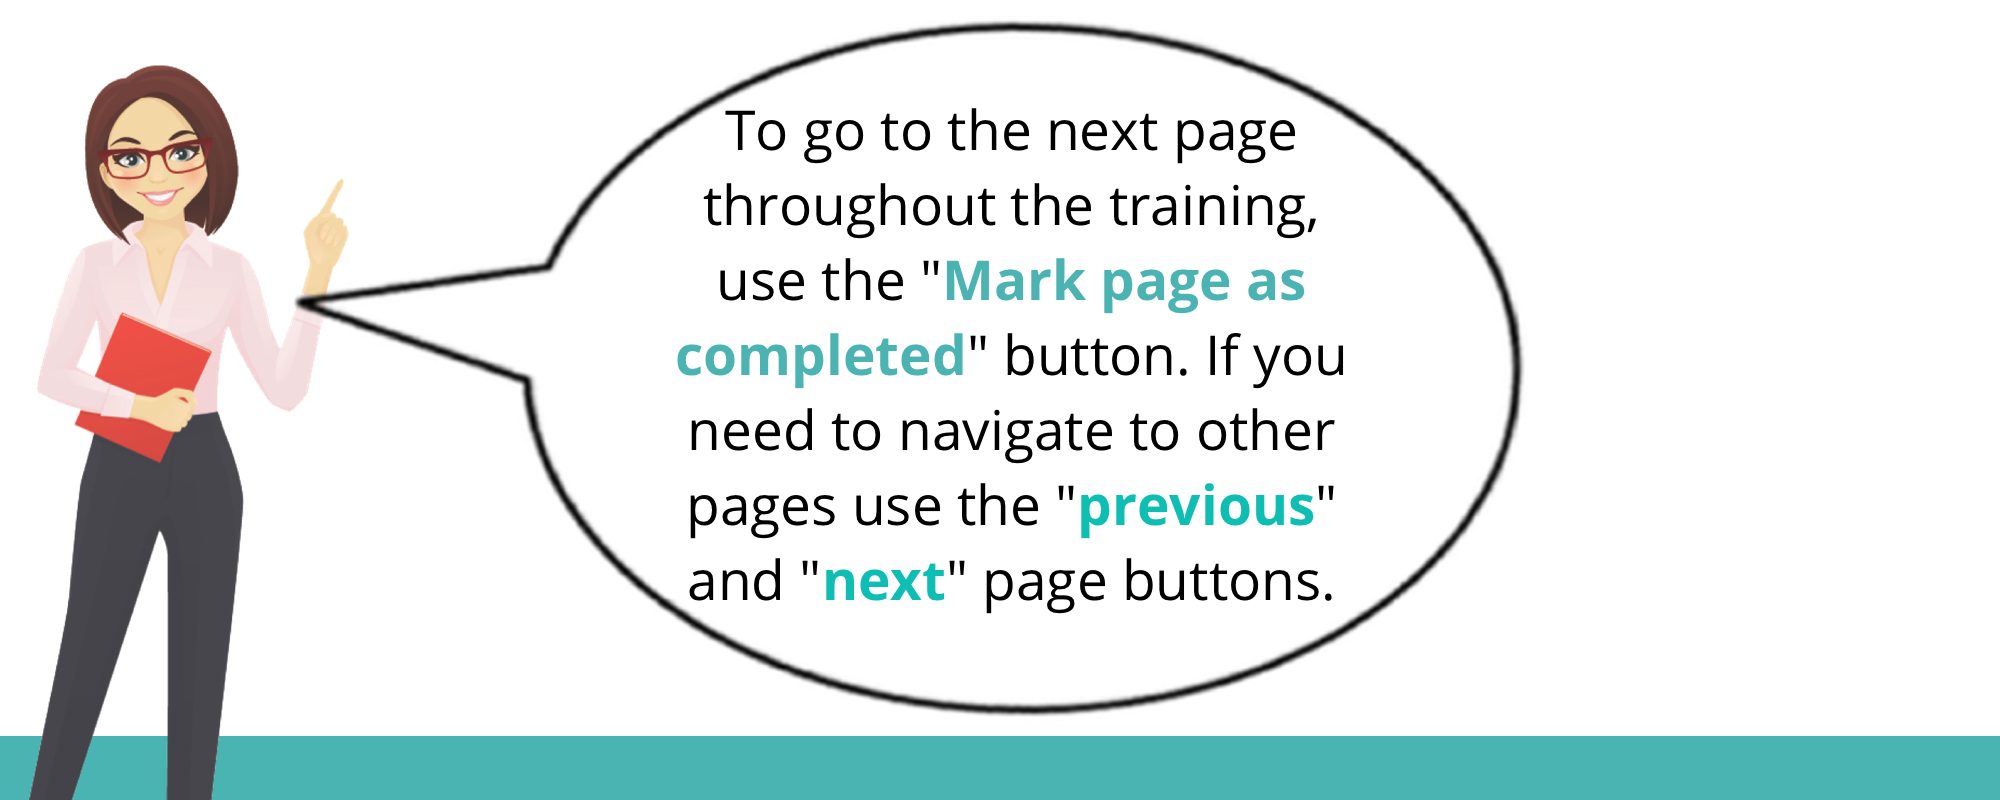 To go to the next page throughout the training, use the "Mark page as completed" button. If you need to navigate to other pages, use the "previous" and "next" page buttons.